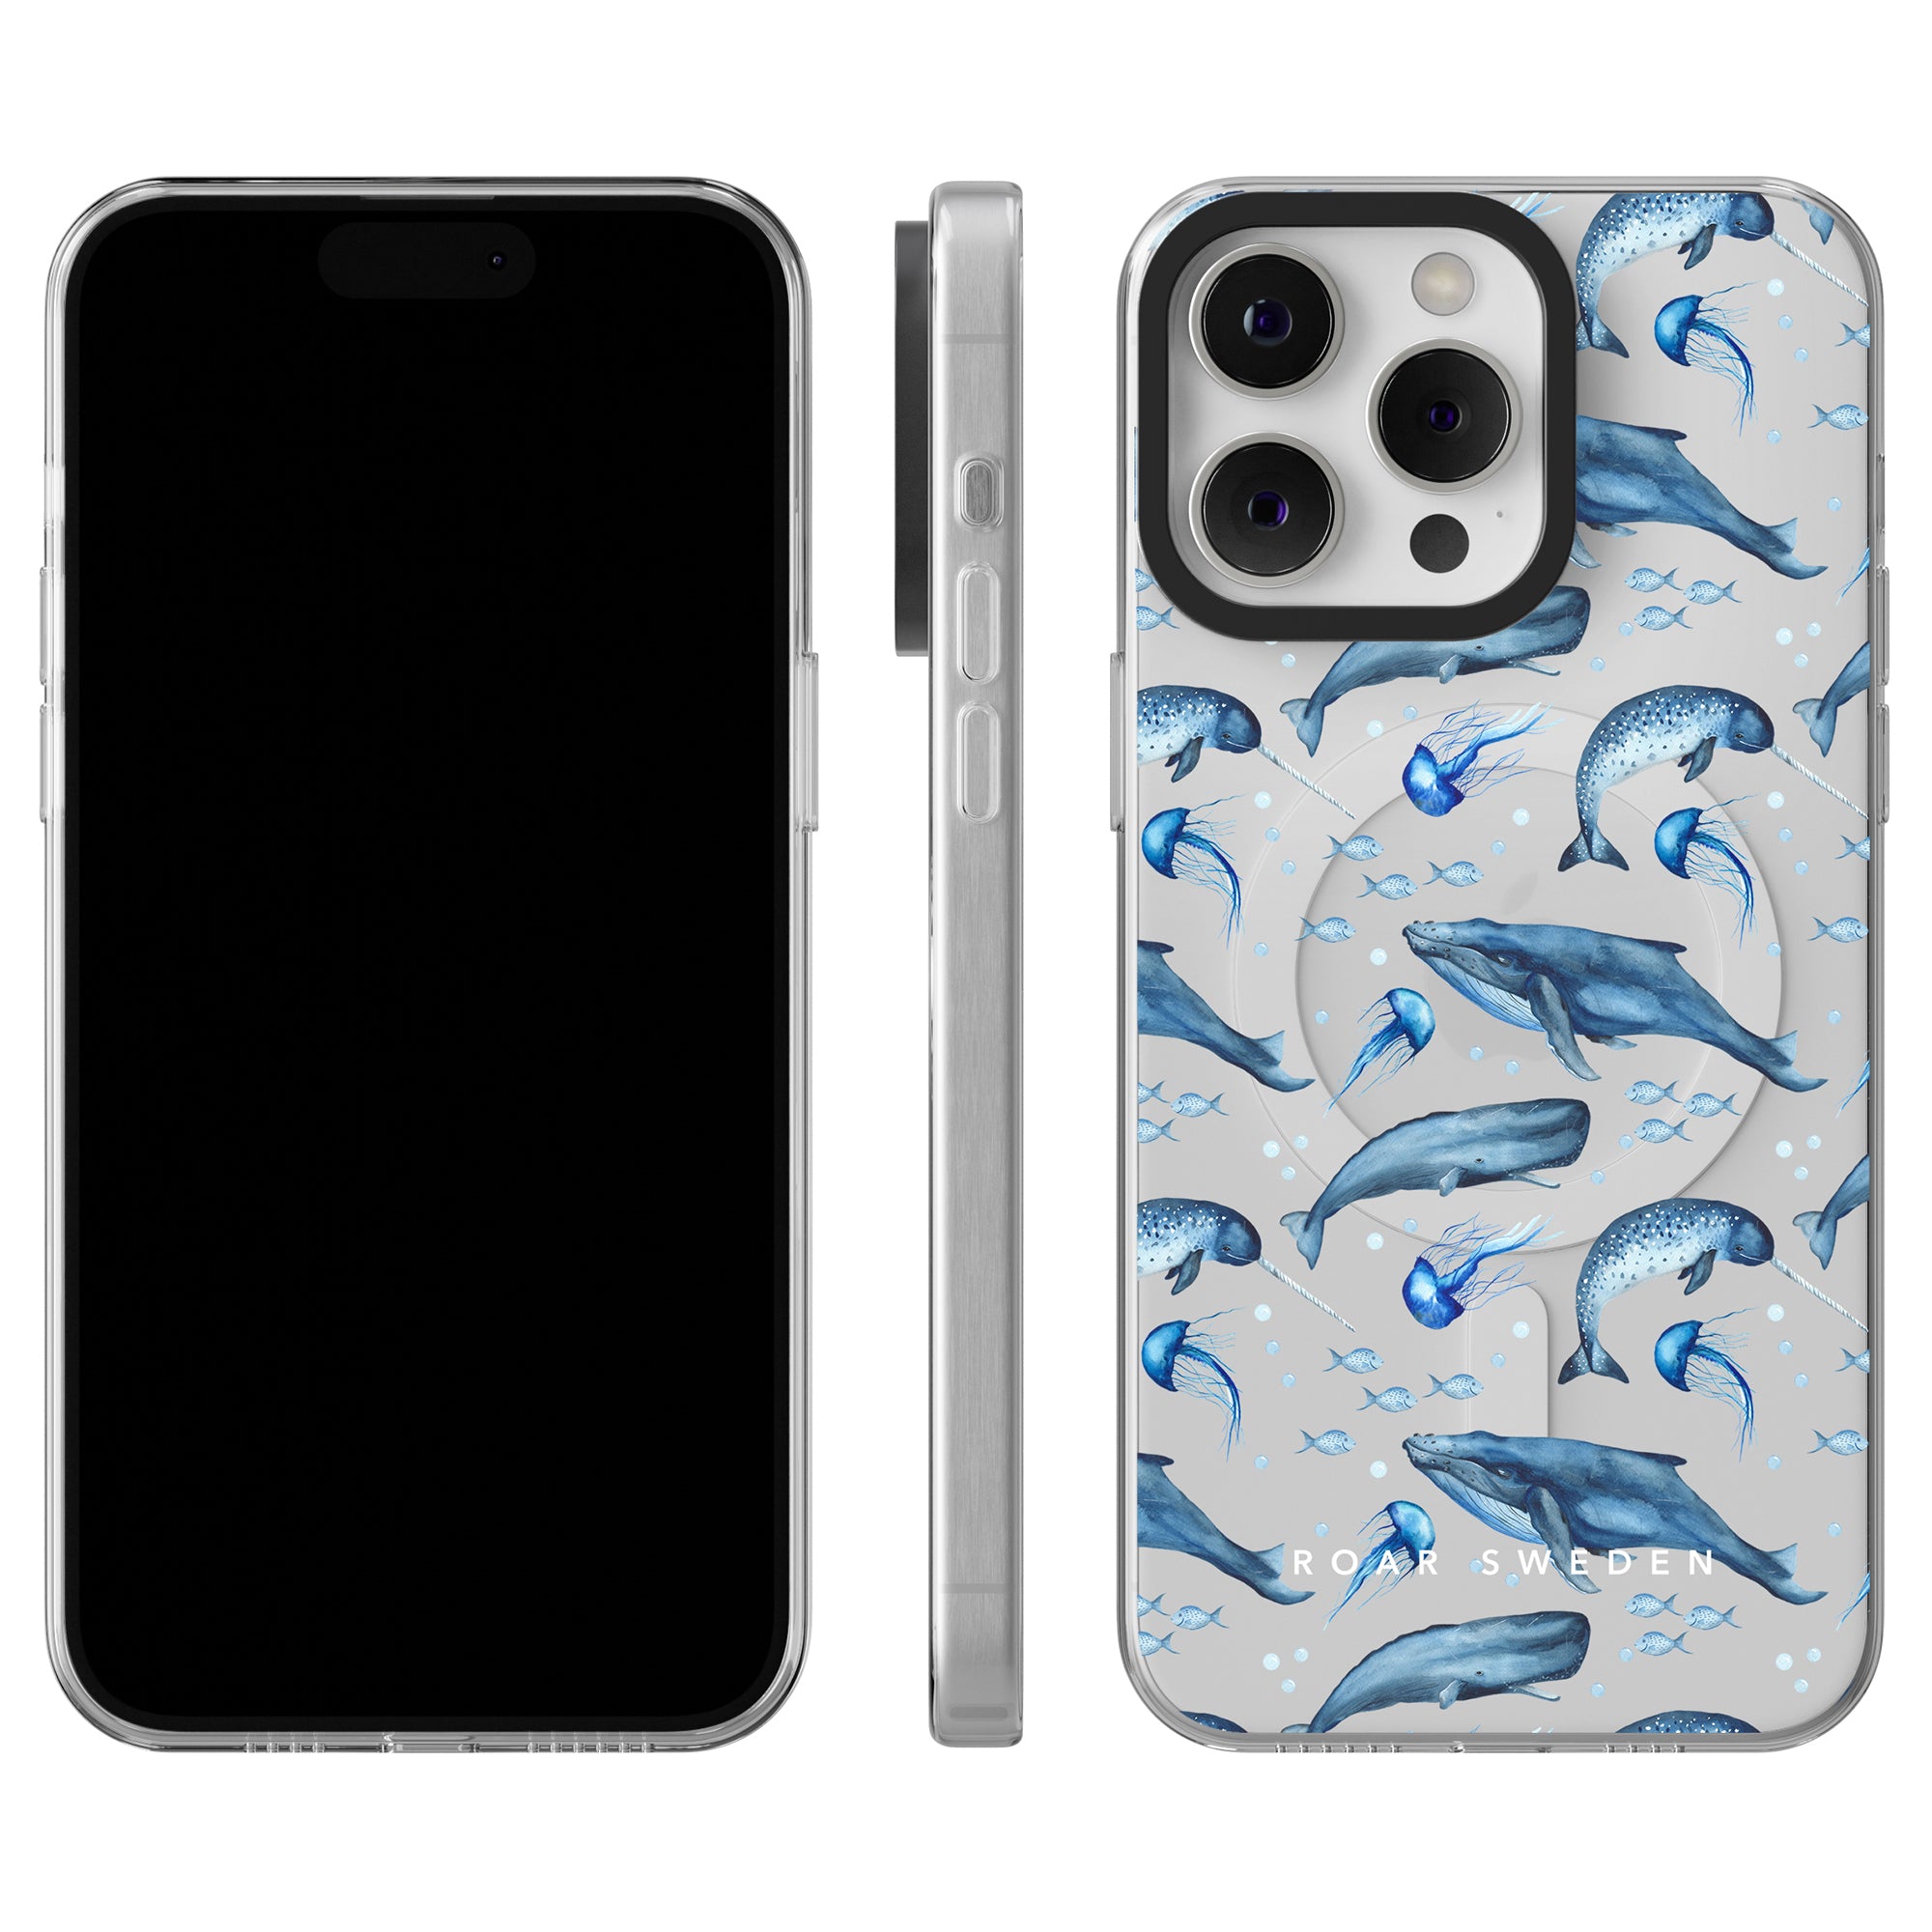 A smartphone with a blank black screen, viewed from the front, side, and back, showcasing a Cetacea - MagSafe Case adorned with whale, fish, and jellyfish illustrations on a gray background. This case beautifully captures undervattensvärldens skönhet.